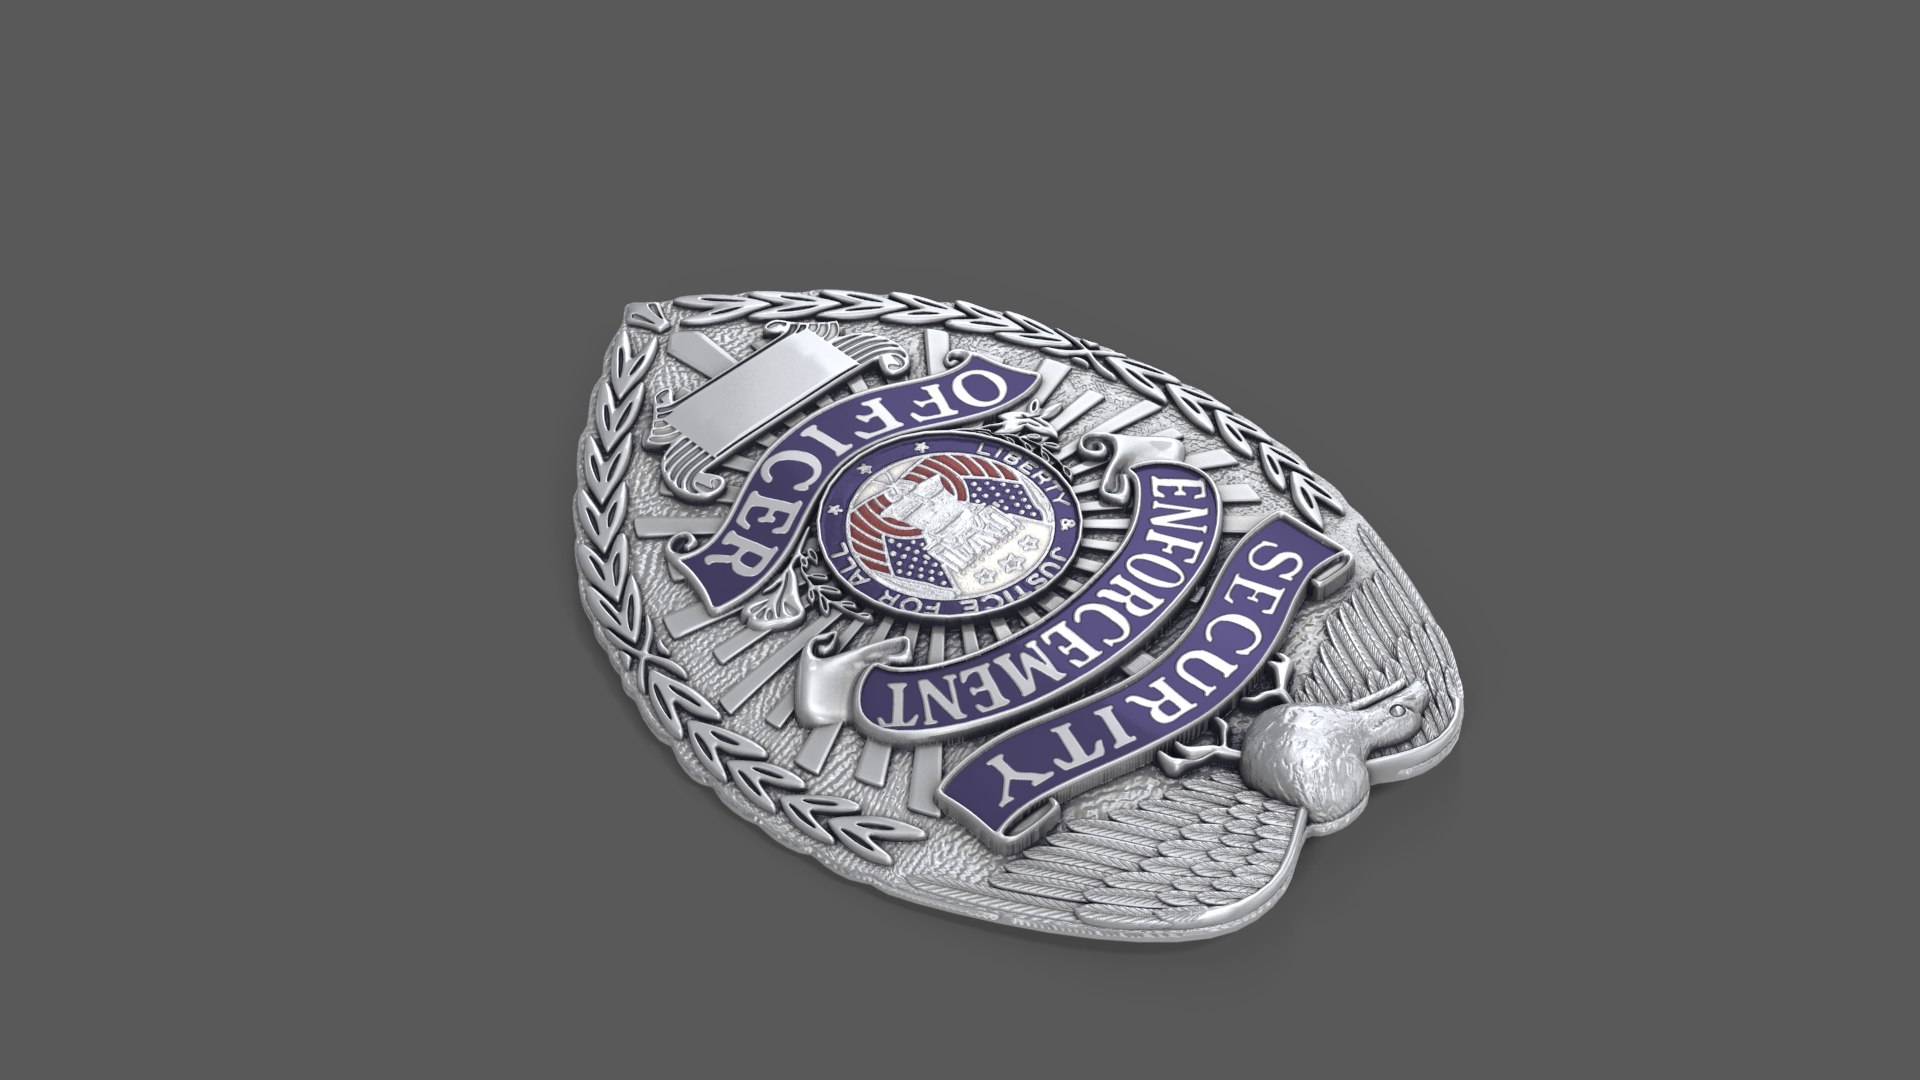 23,650 Security Officer Badge Images, Stock Photos, 3D objects